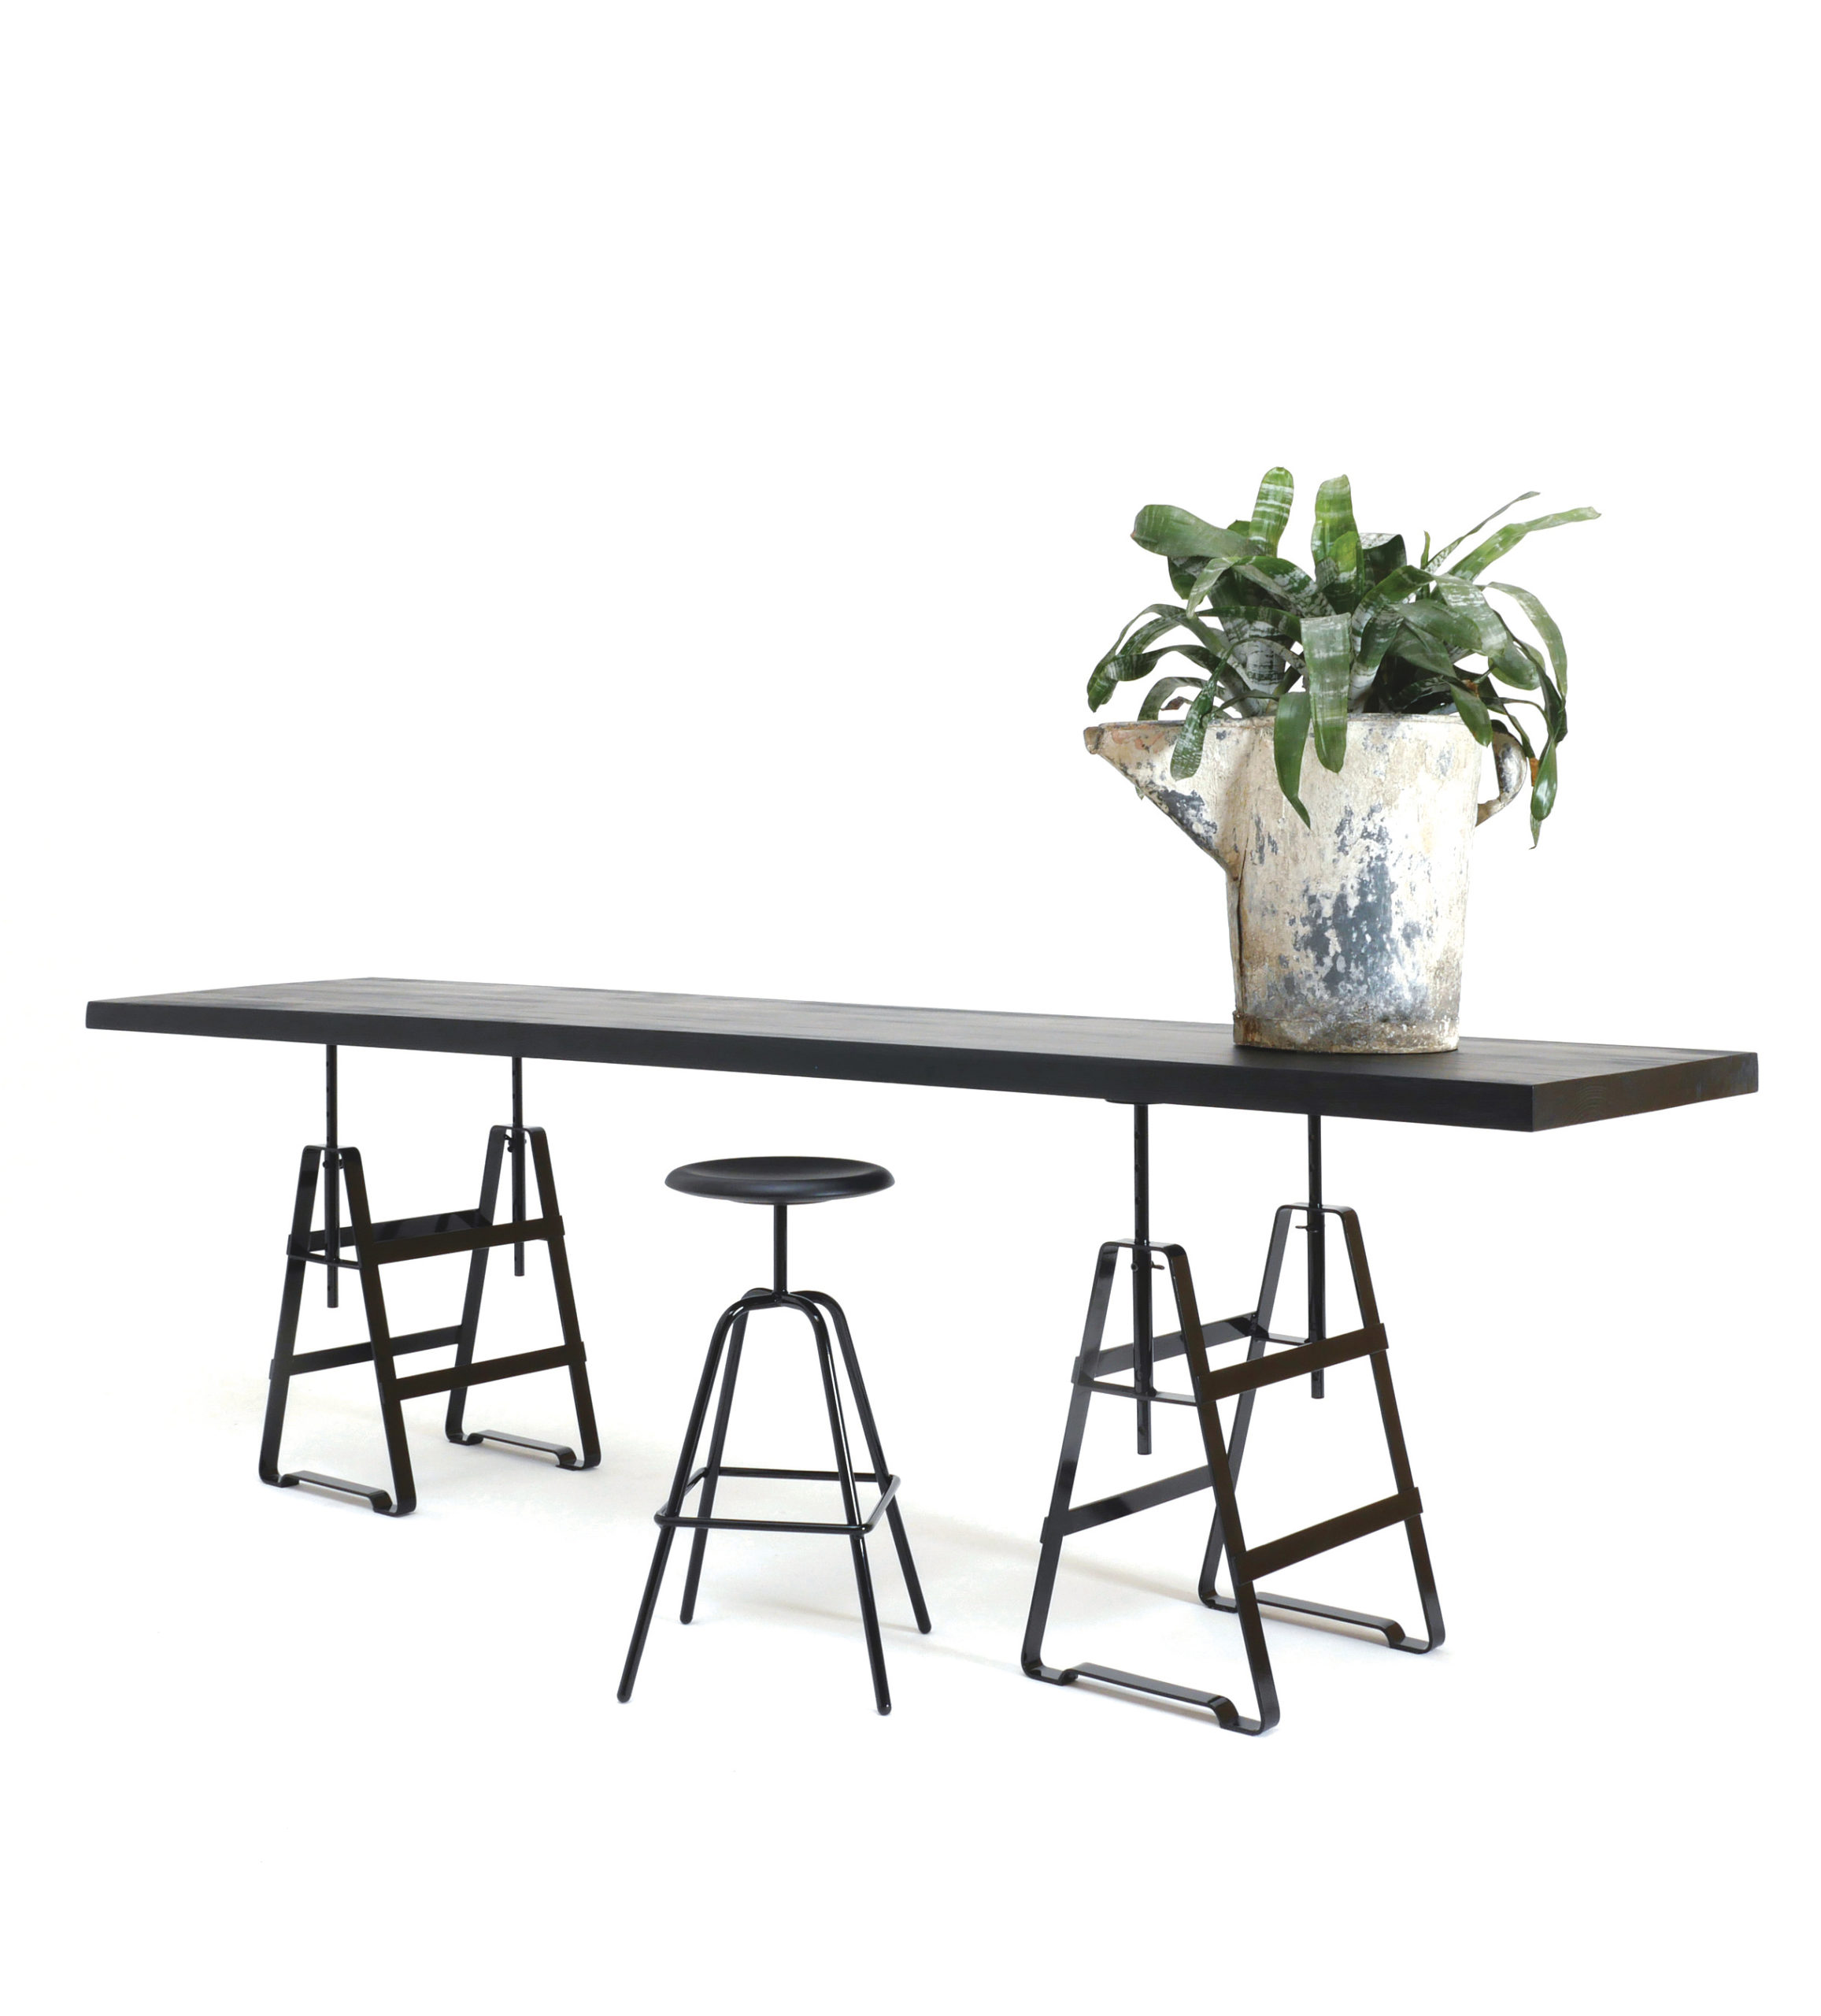 Design Thesenfitz & Wedekind A height adjustable trestle made from crude steel powder-coated in black glossy, tabletop wood black from Zascho Petkow